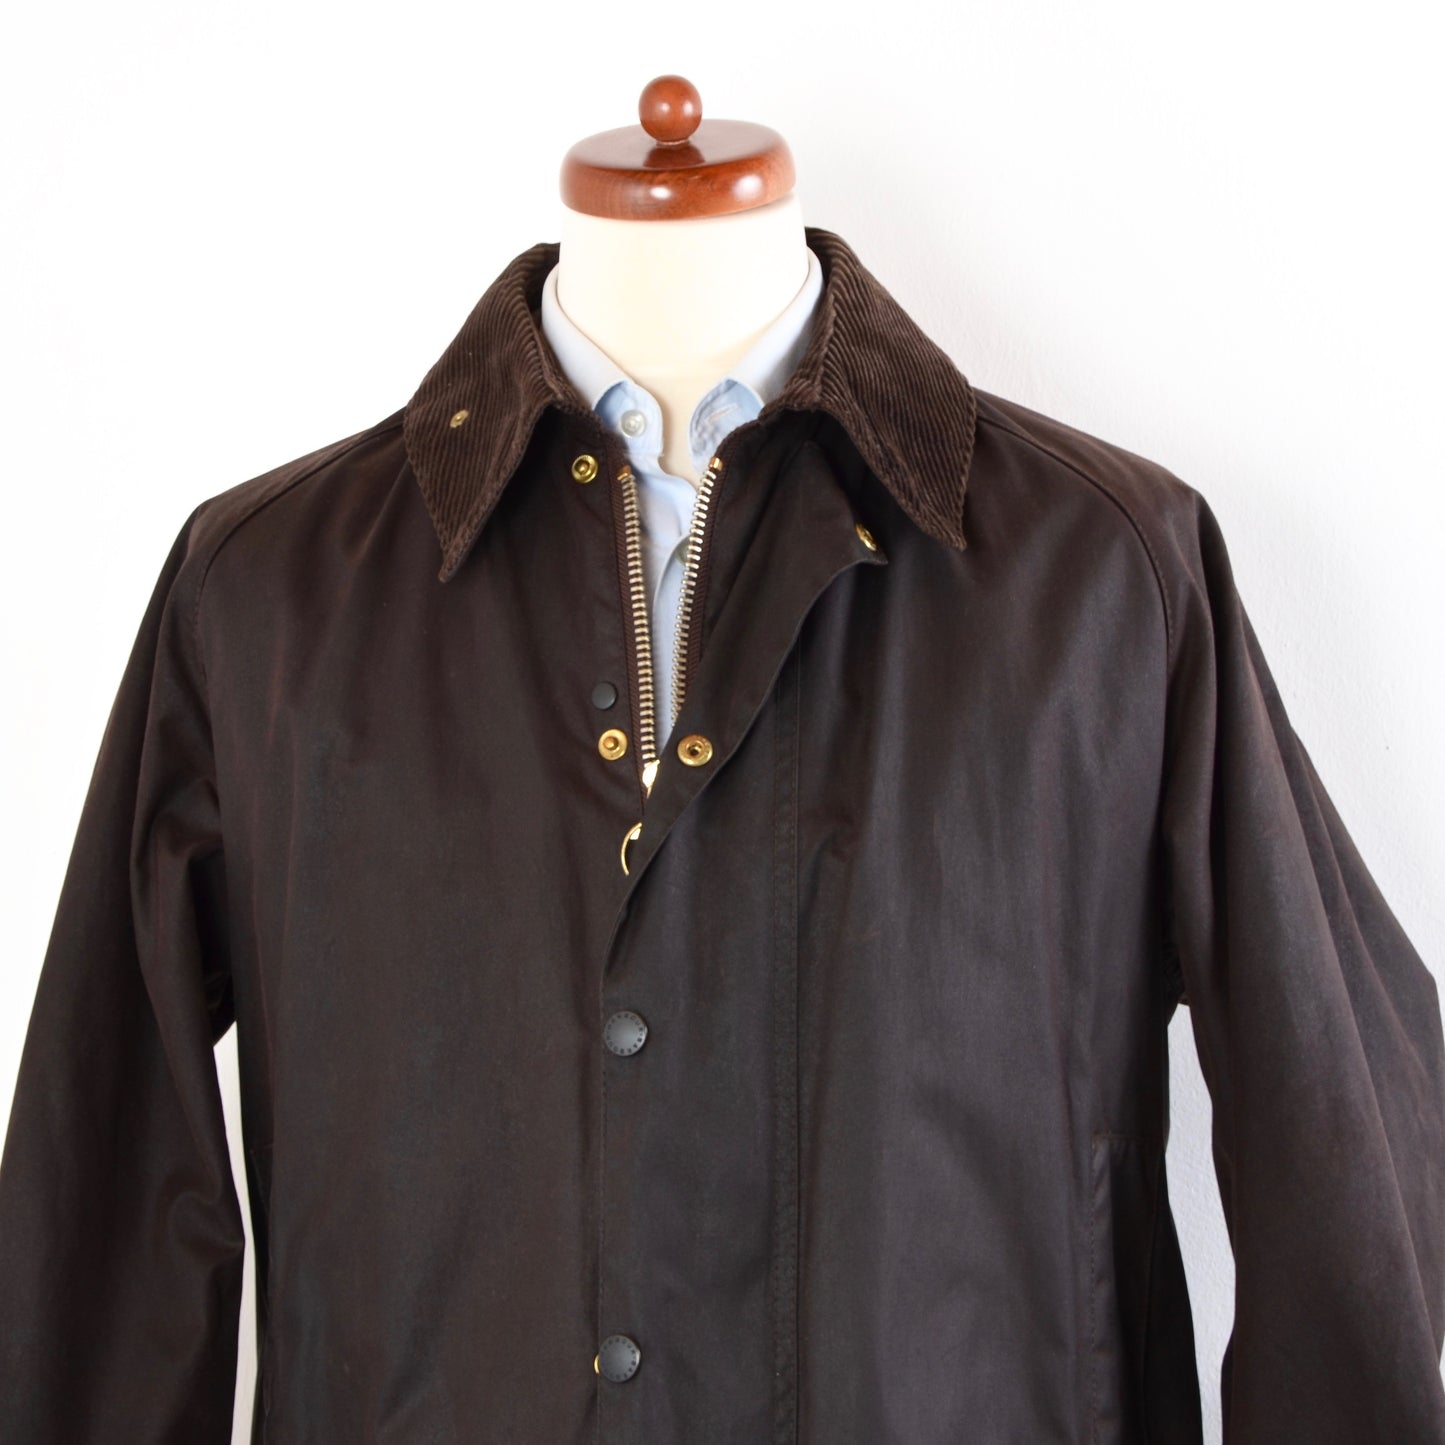 Barbour Beaufort Waxed Jacket A190 Size C44/112cm - Brown